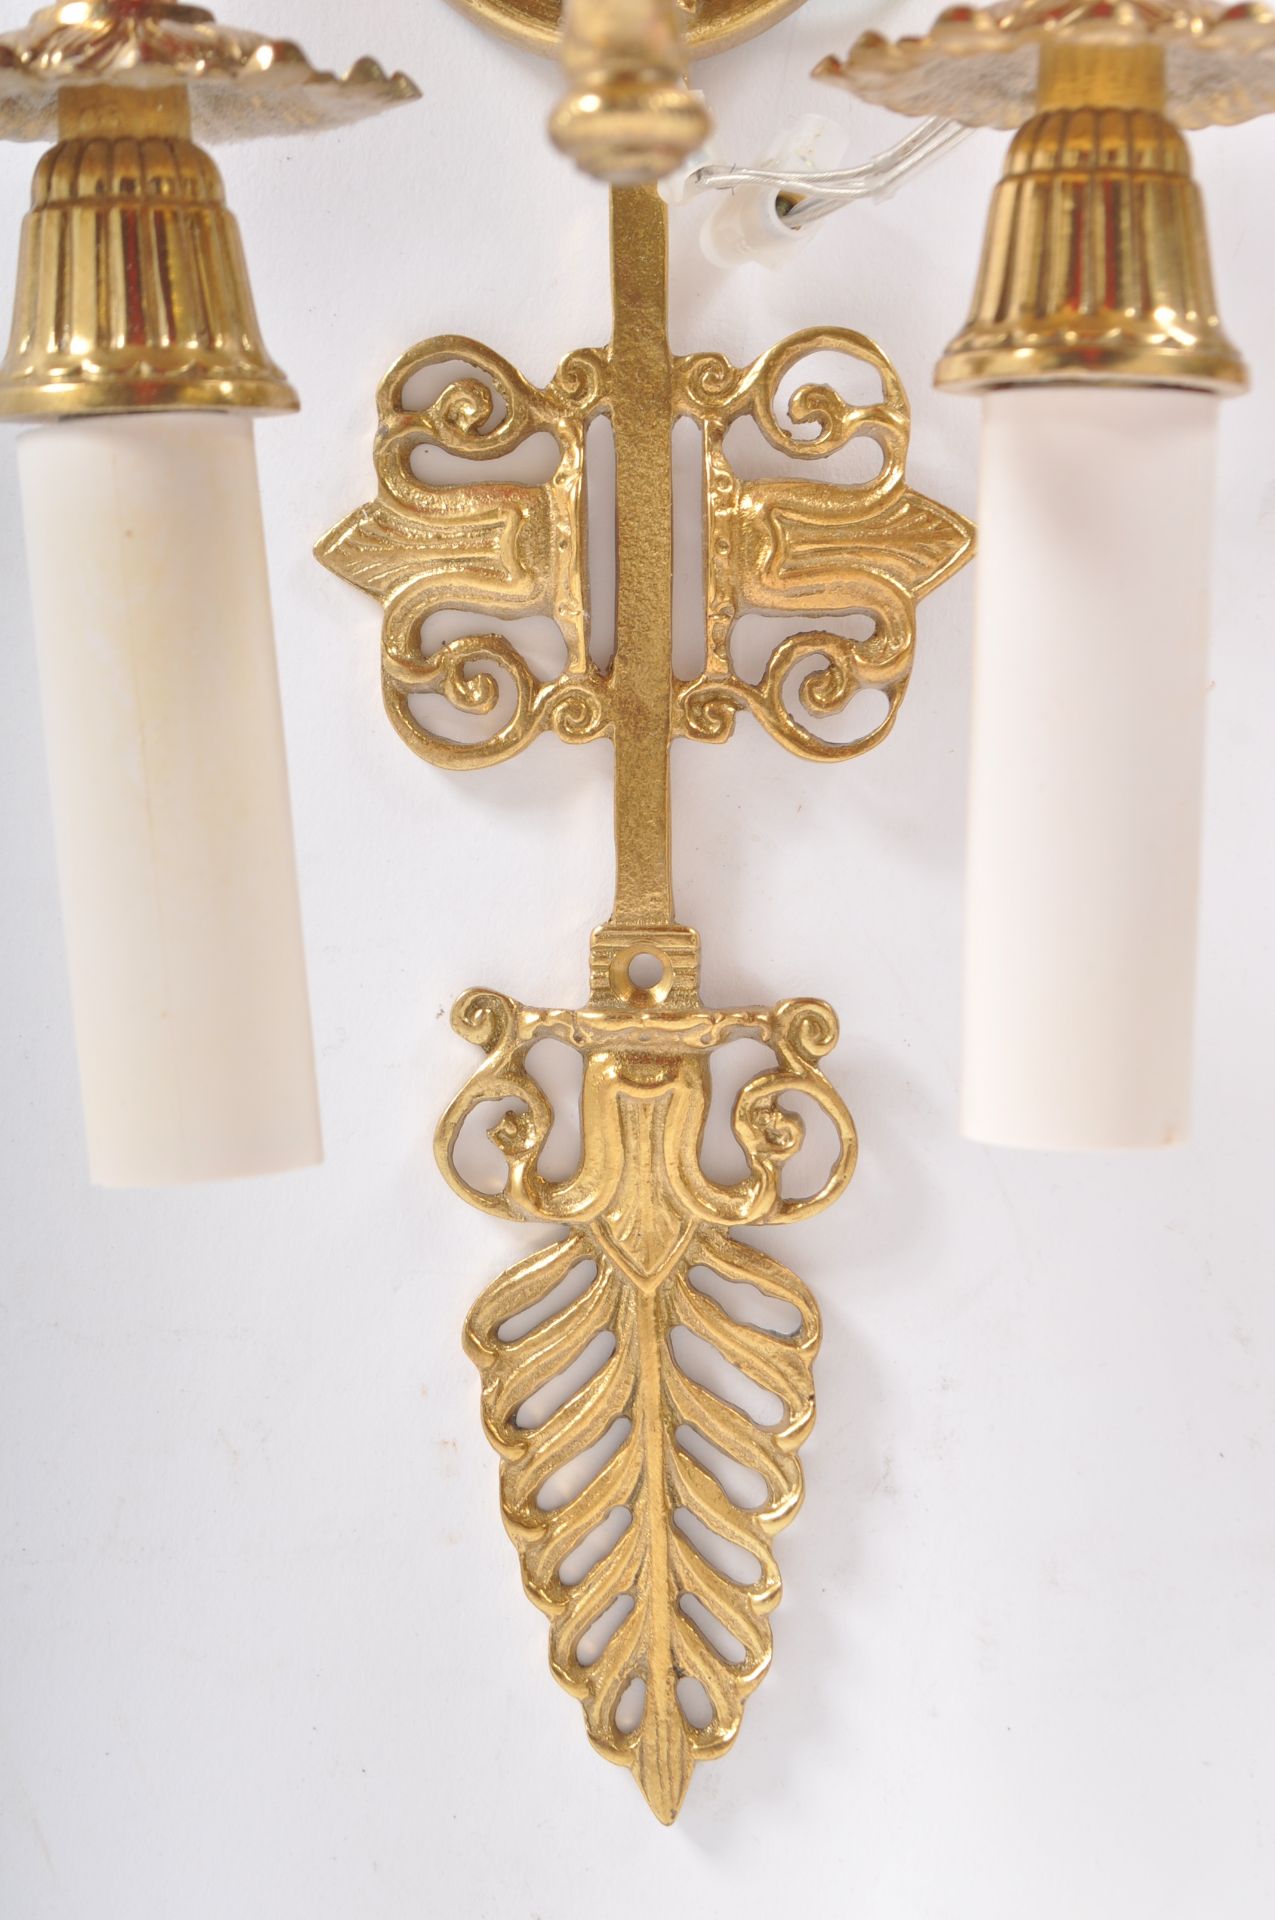 SUITE OF ANTIQUE REVIVAL GILT METAL LIGHTING - Image 12 of 13